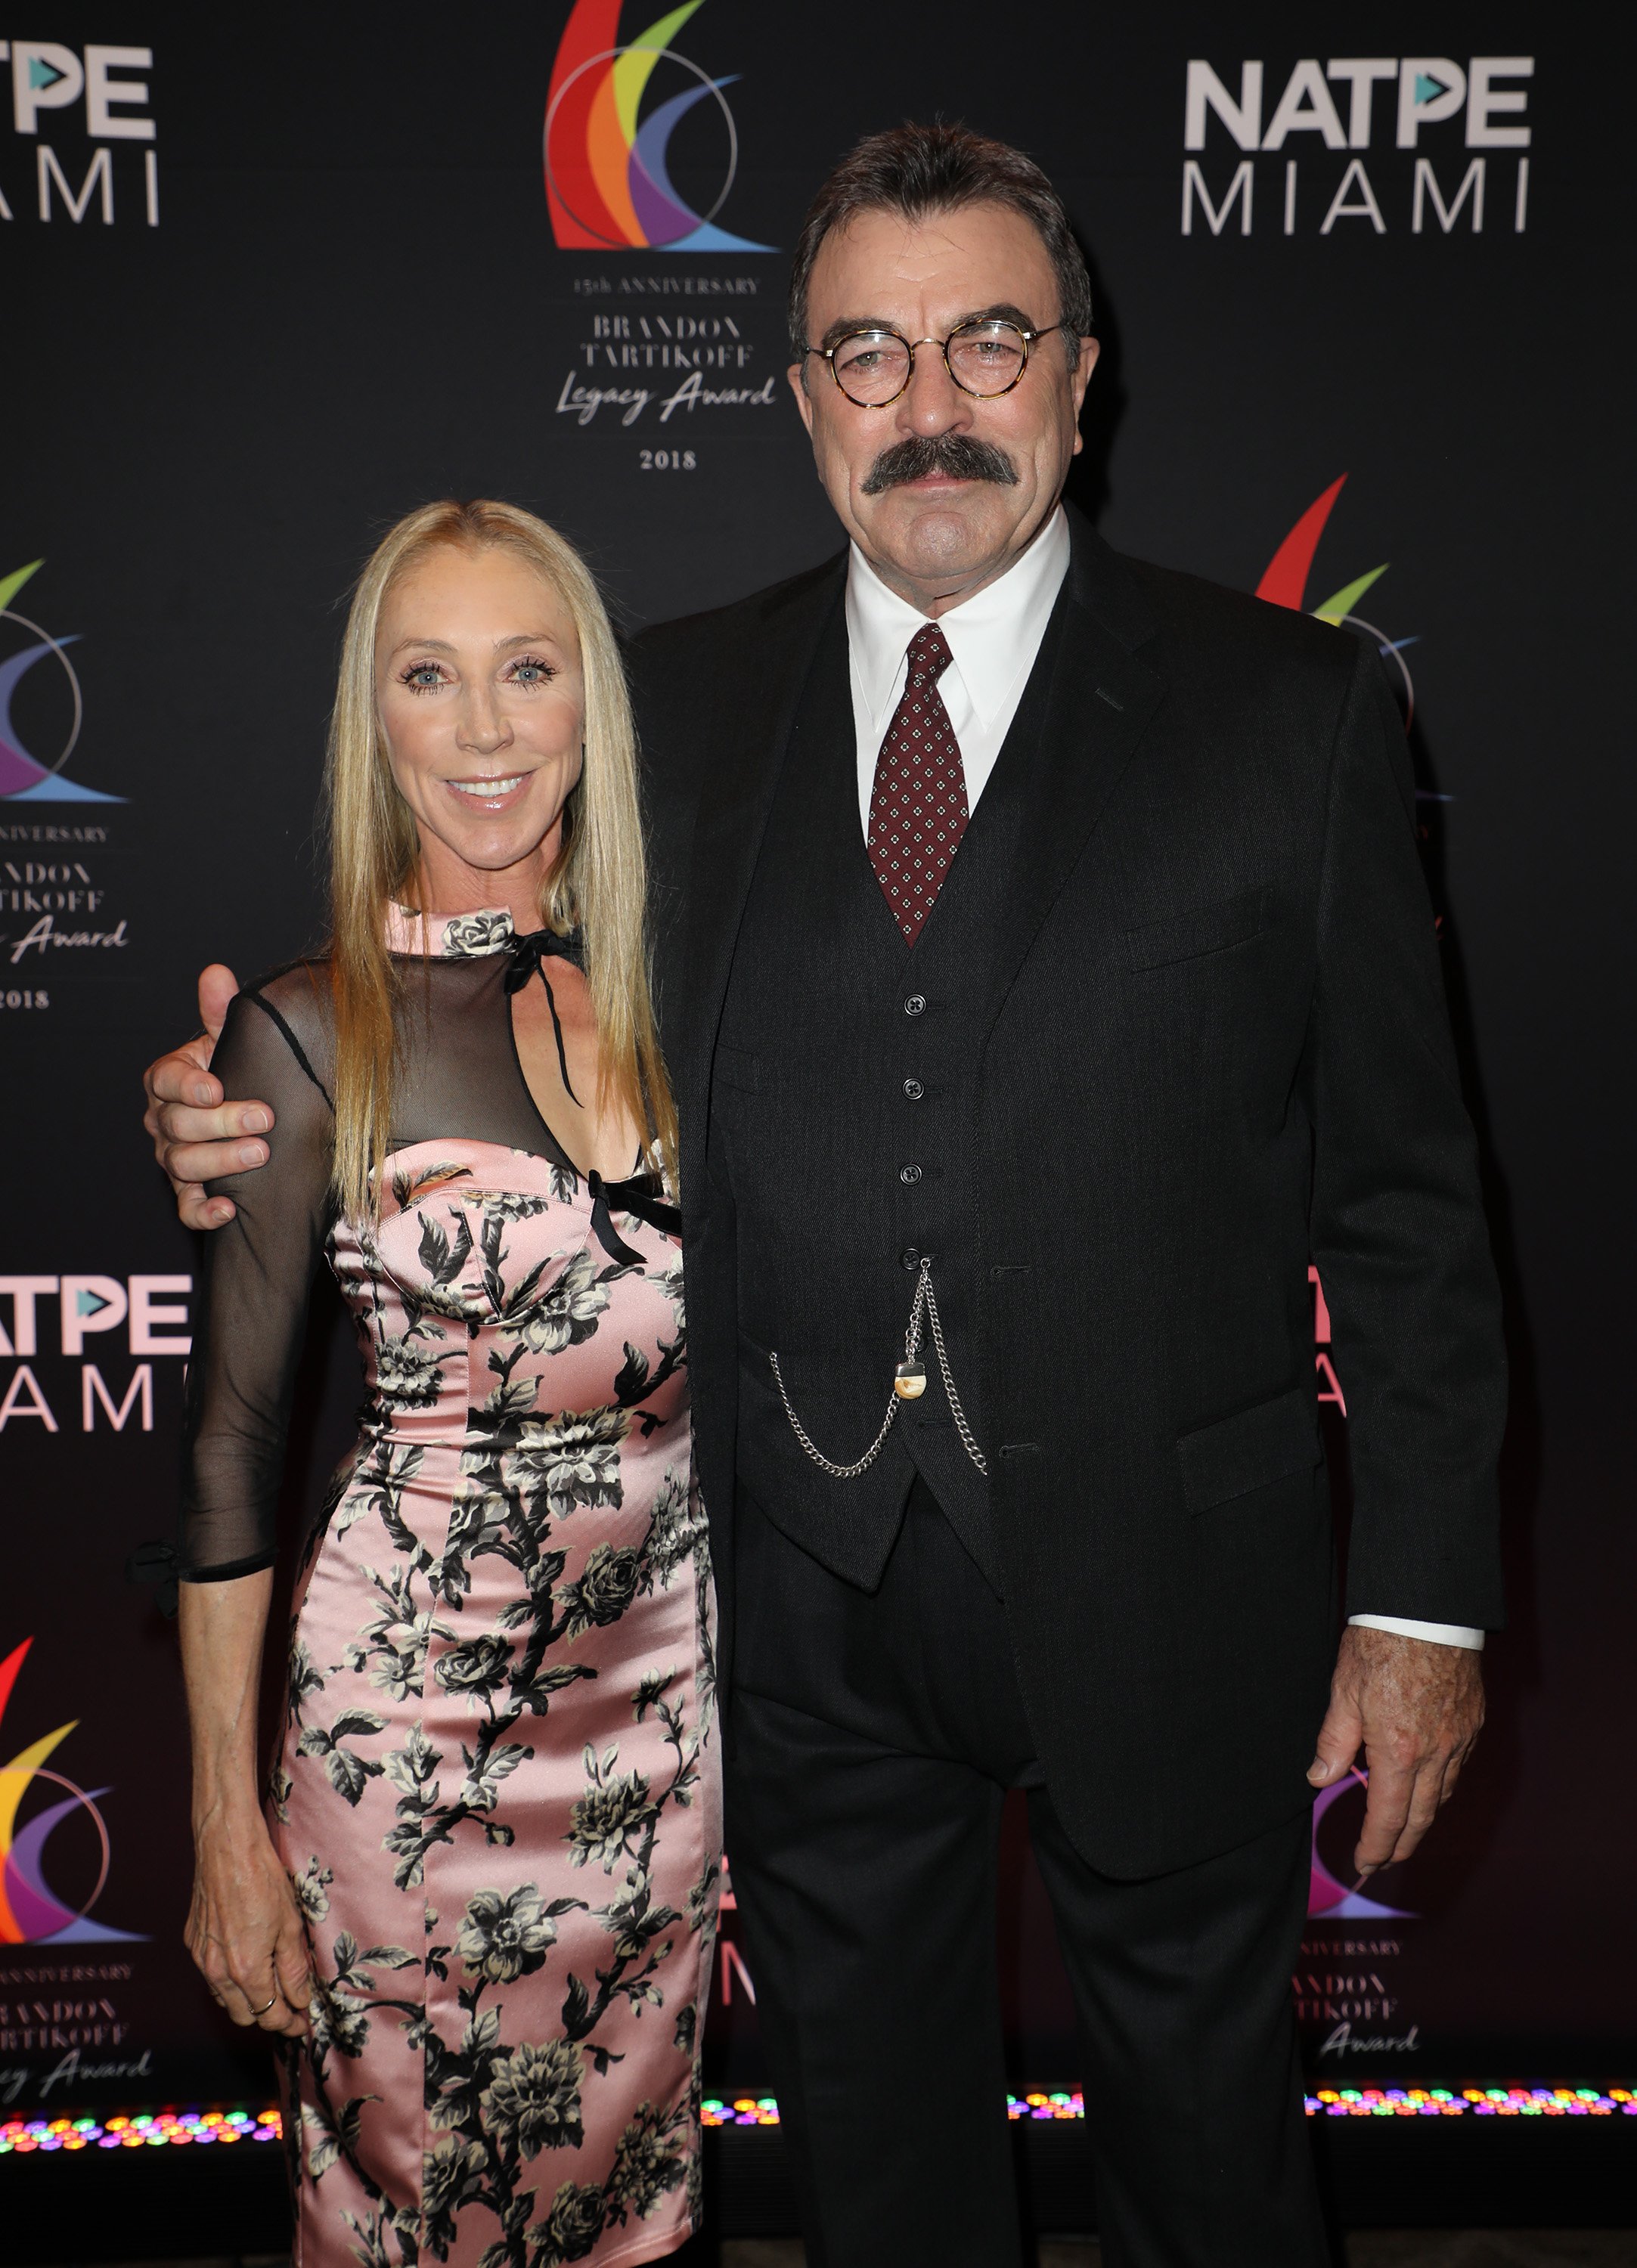 Jillie Mack and Tom Selleck attend the Brandon Tartikoff Legacy Awards at NATPE 2018 in Miami Beach, Florida on January 17, 2018 | Photo: Getty Images